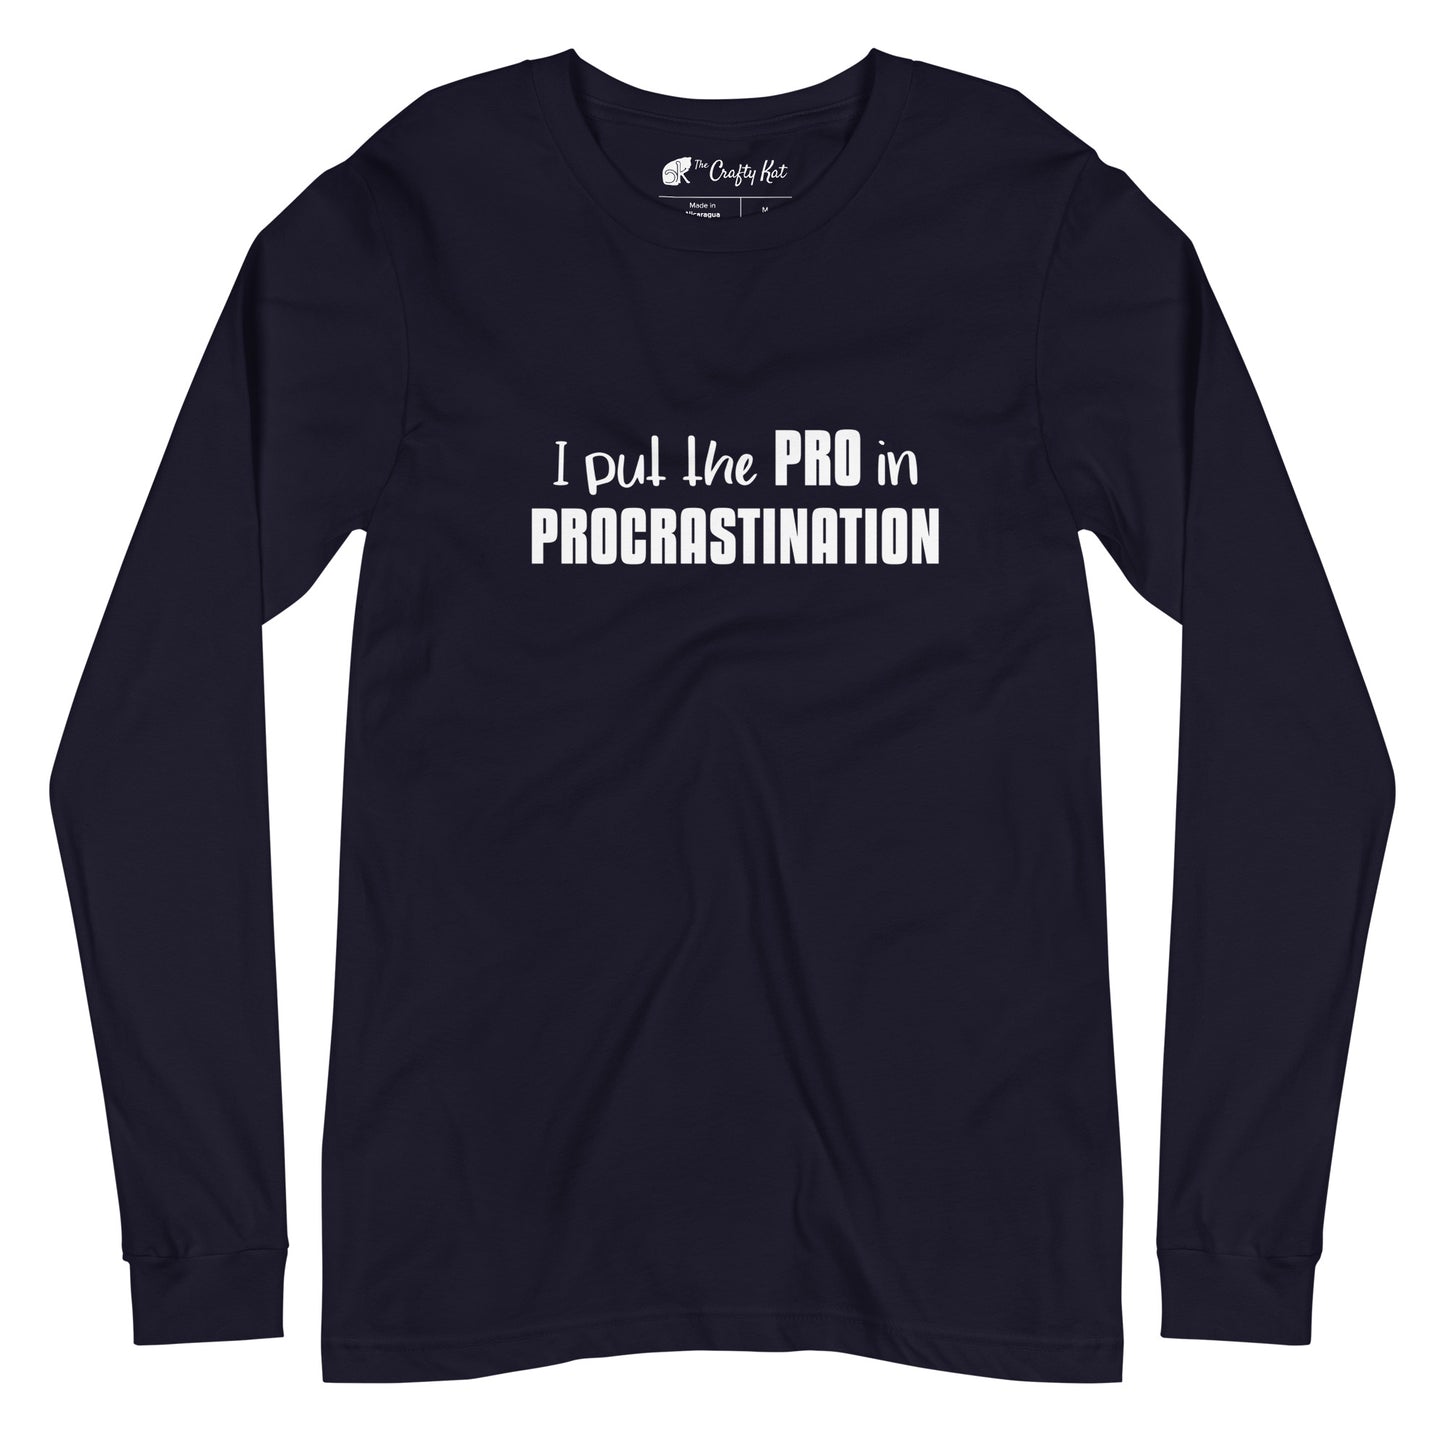 Navy long-sleeve shirt with text graphic: "I put the PRO in PROCRASTINATION"